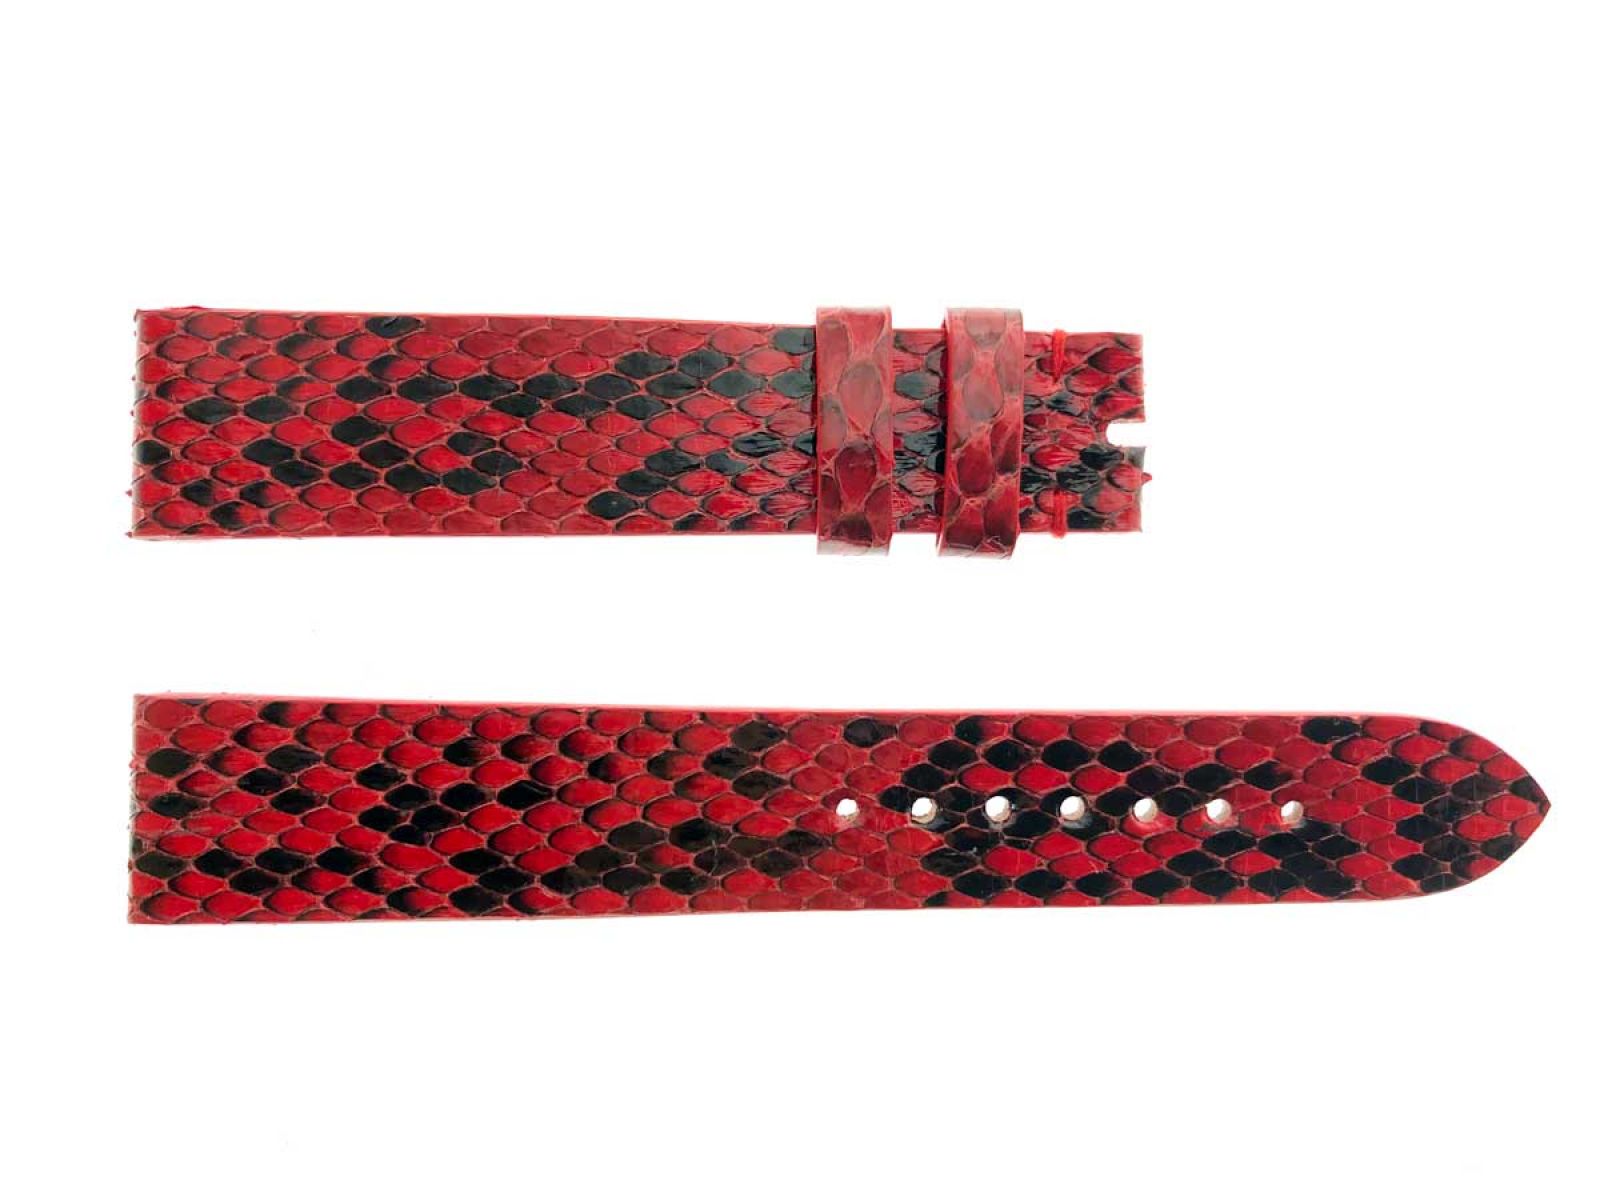 Red Gloss Python Leather Strap 16mm, 18mm, 19mm, 20mm, 21mm, 22mm General style